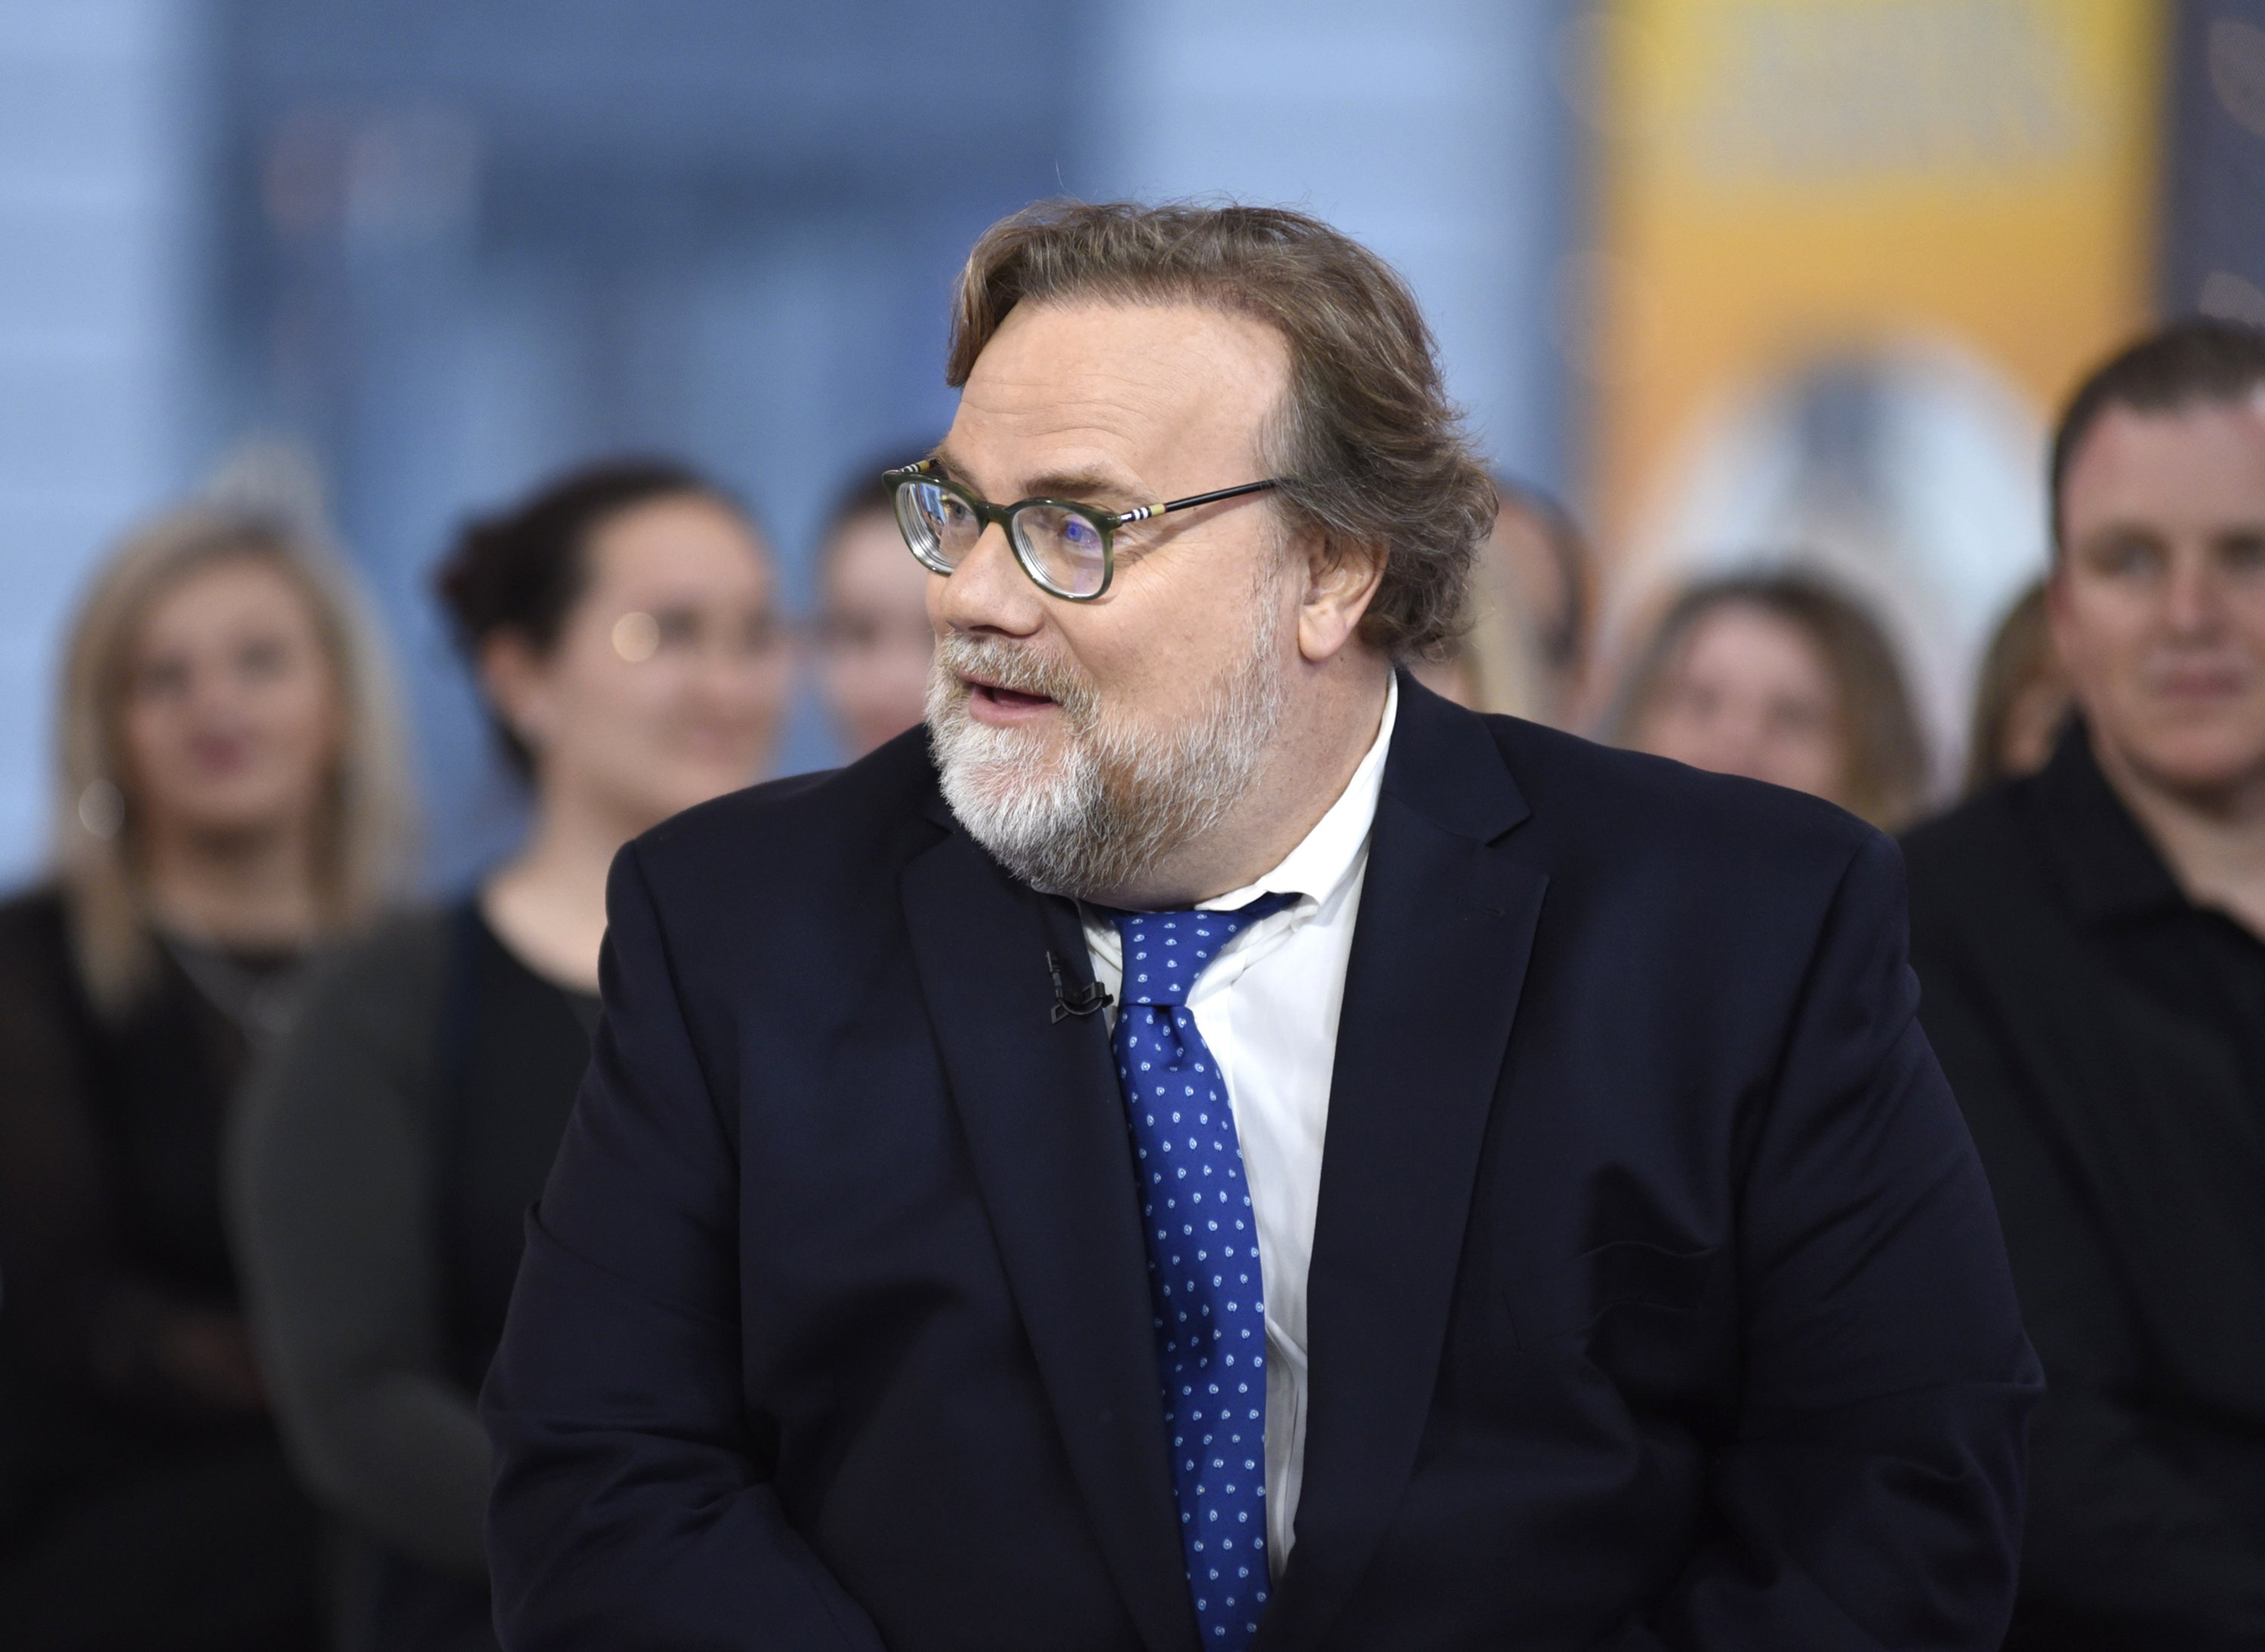 Kevin Farley is a guest on "Good Morning America," Thursday, May 23, 2019, on the Walt Disney Television Network. I Source: Getty Images